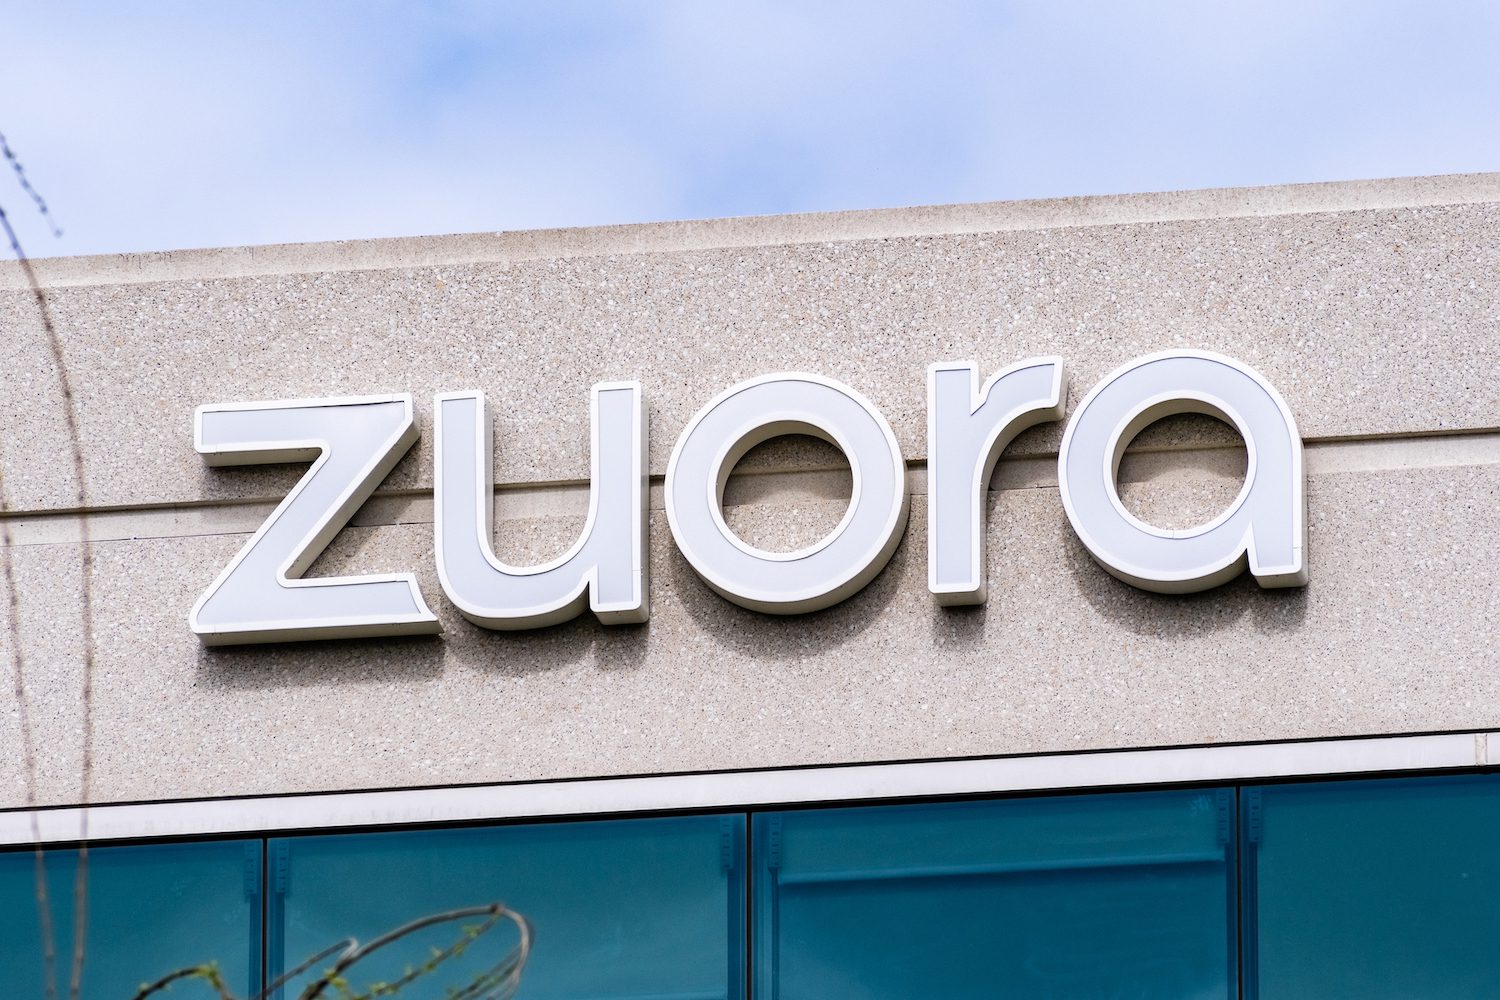 US subscription platform Zuora to acquire UK’s Zephr for £37m